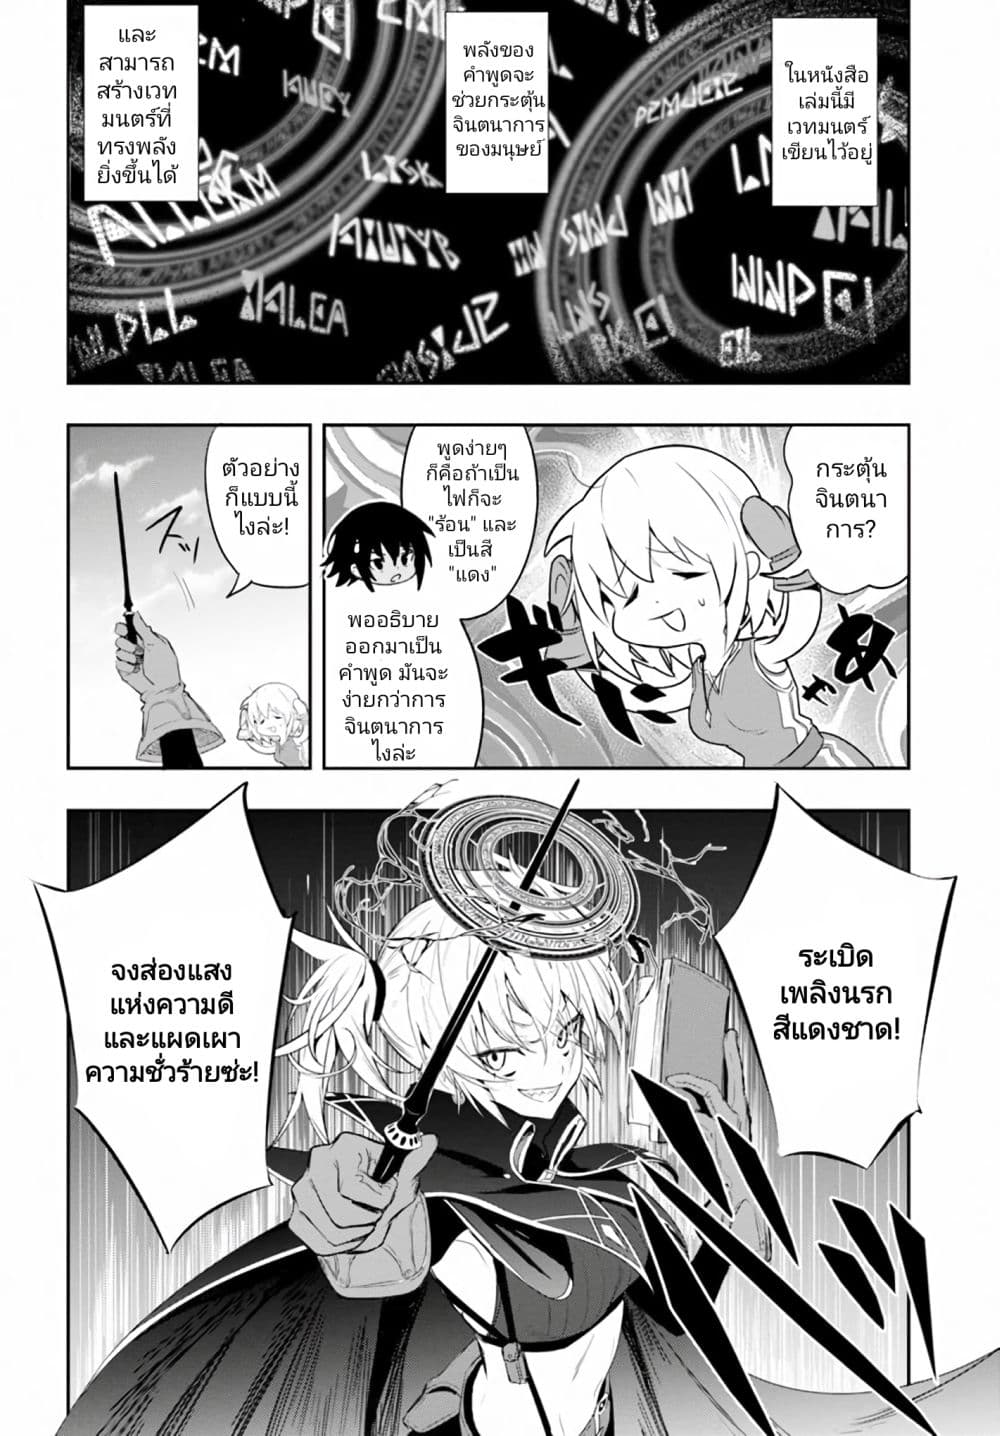 Witch Guild Fantasia 6 (20)